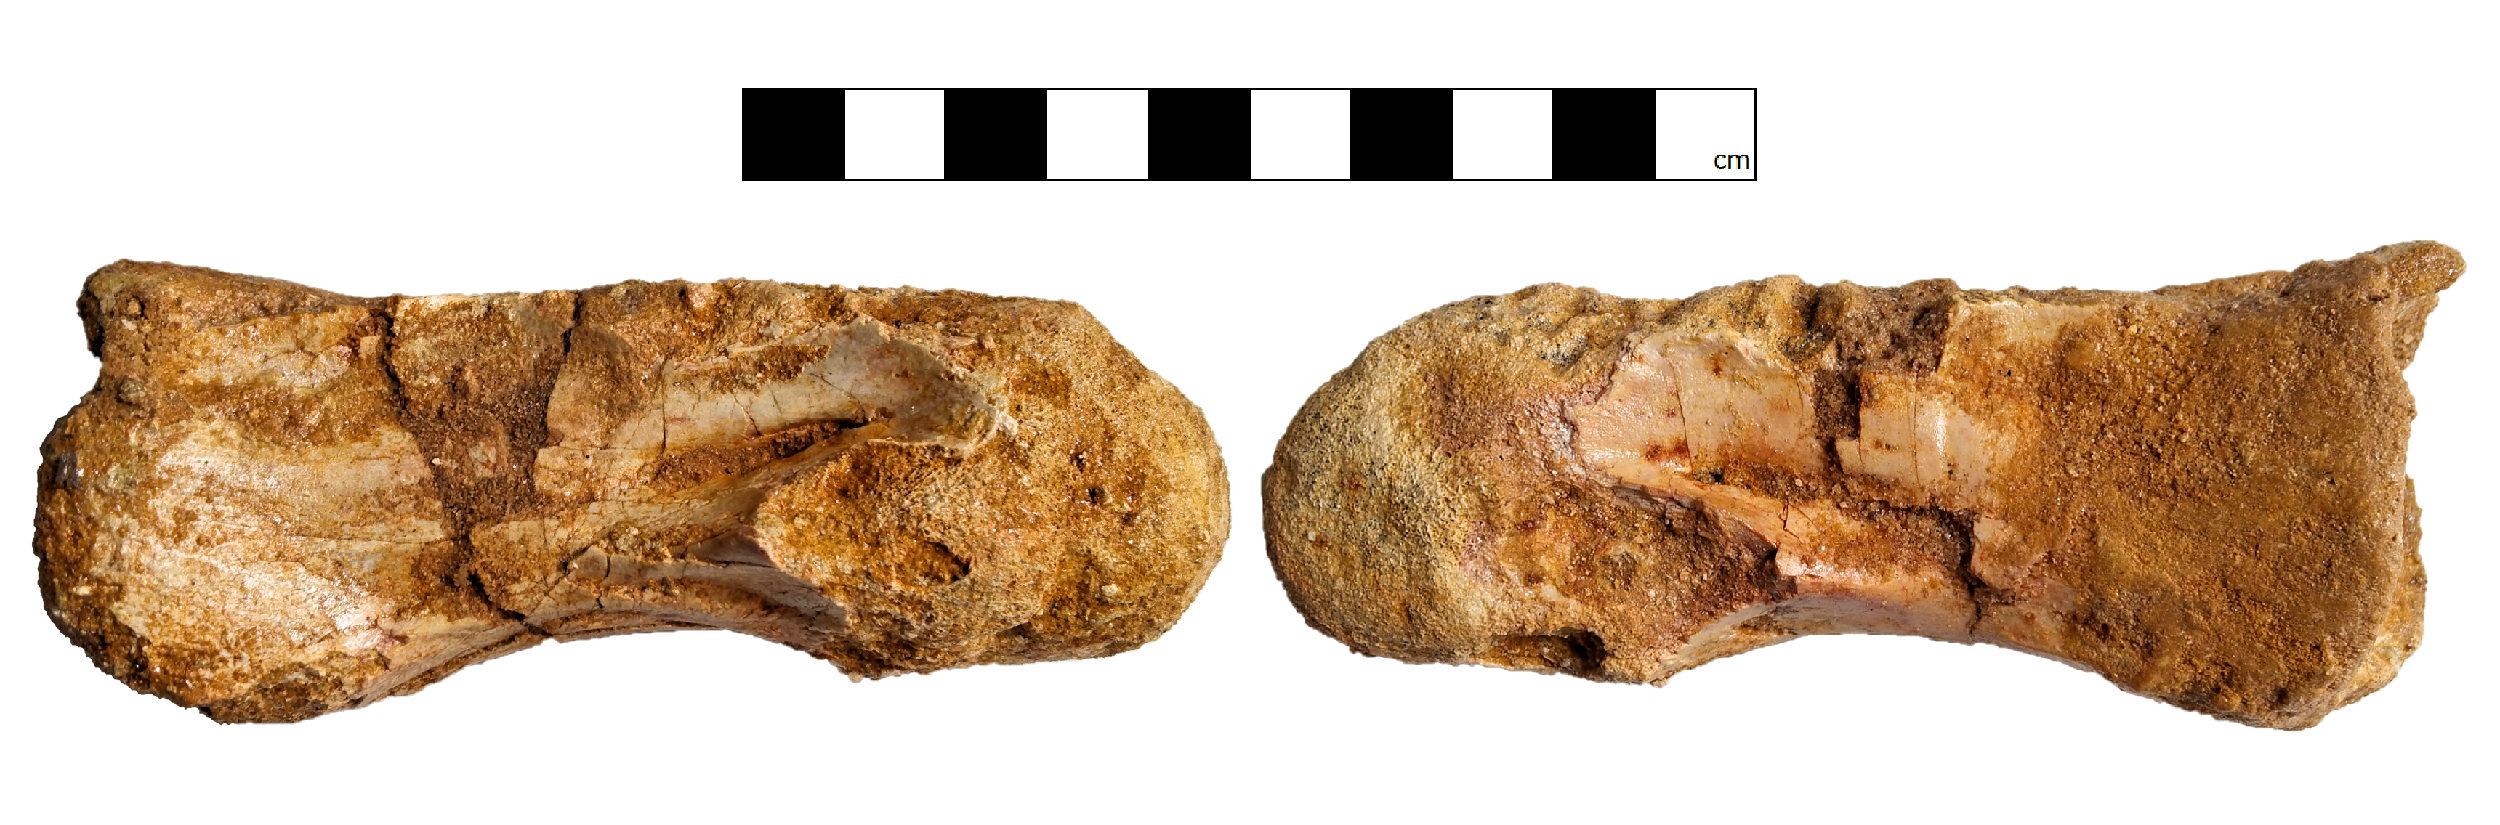 Anterior cervical (estimated vertebra location: C2) vertebra (GCE2105098997A) of Spinosaurid tentatively refer as Spinosaurus dorsojuvencus. From left image: in right lateral view (side view); Right image: in left lateral view